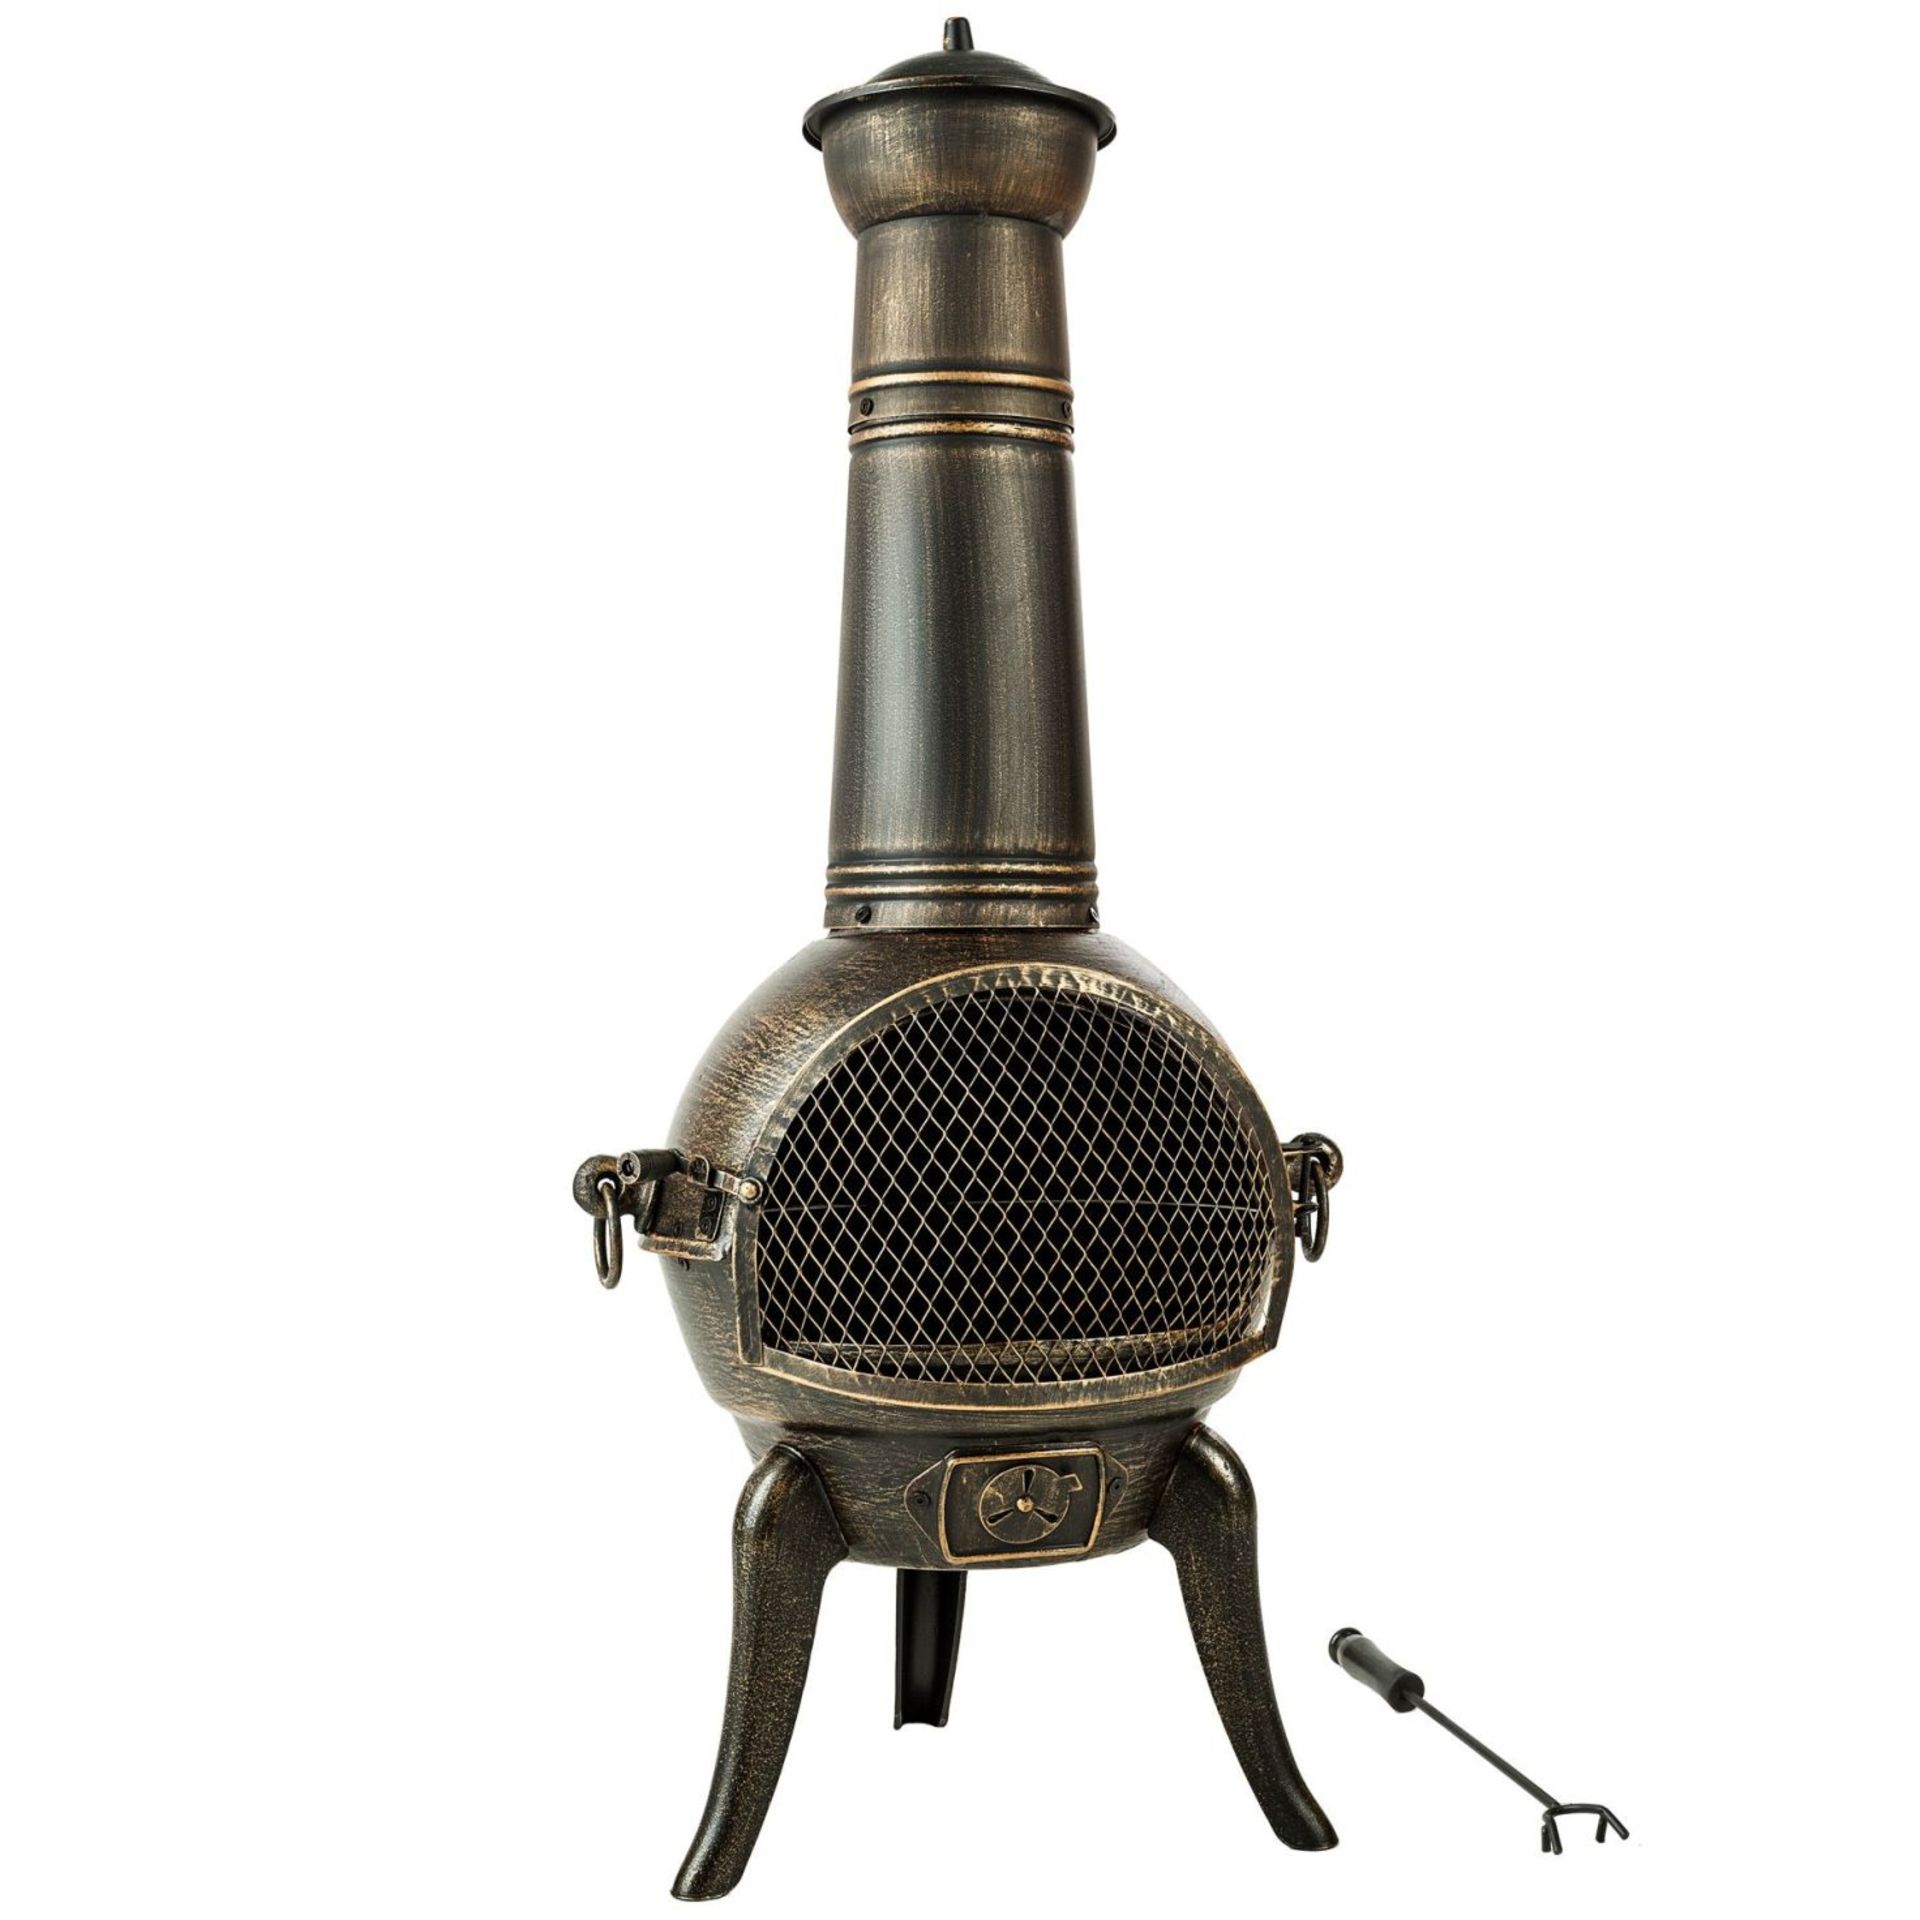 Tectake - Fire Pit With Chimney Made Of Cast Iron Grey - Boxed. RRP £89.99 - Image 2 of 2